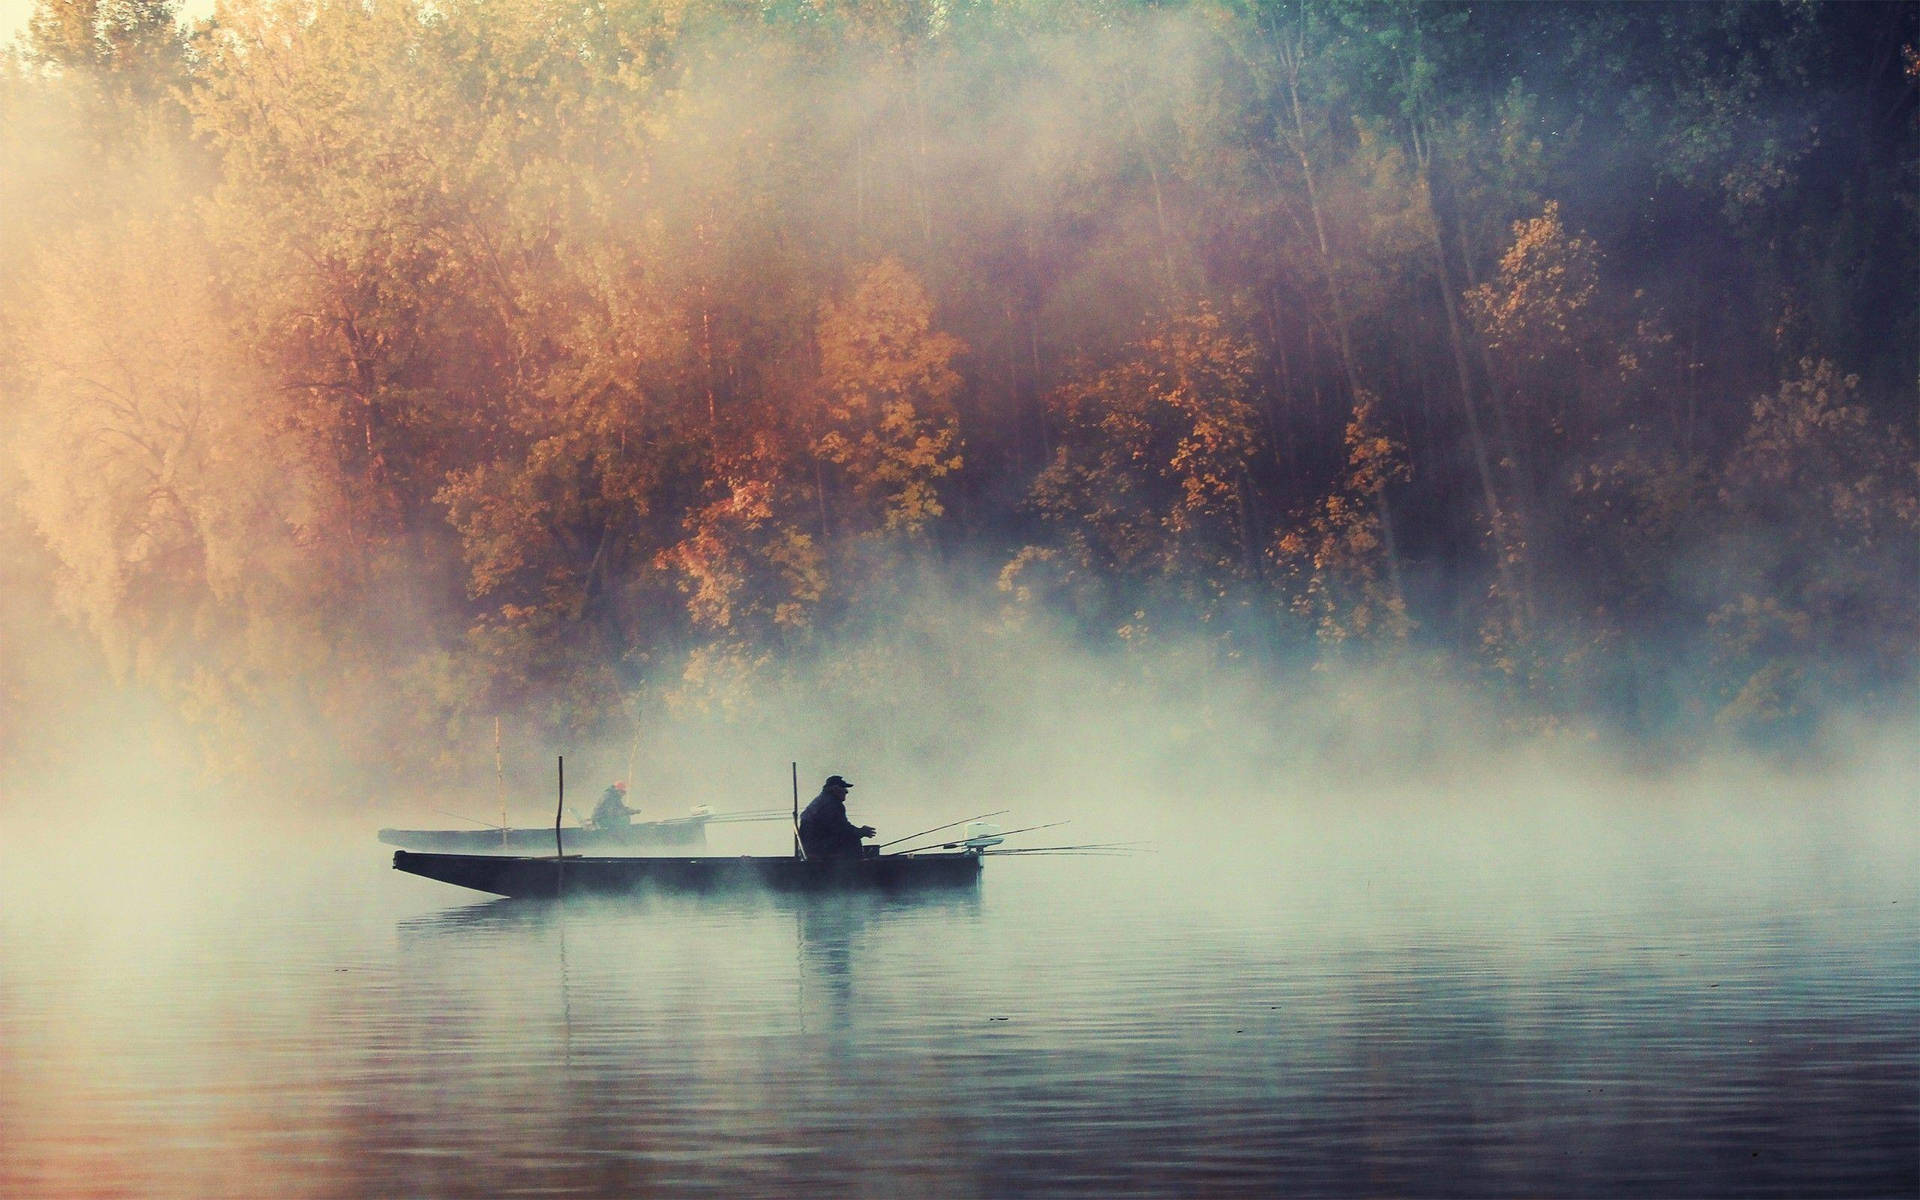 Enjoying An Early Morning Fishing Trip In A Misty Lake Background